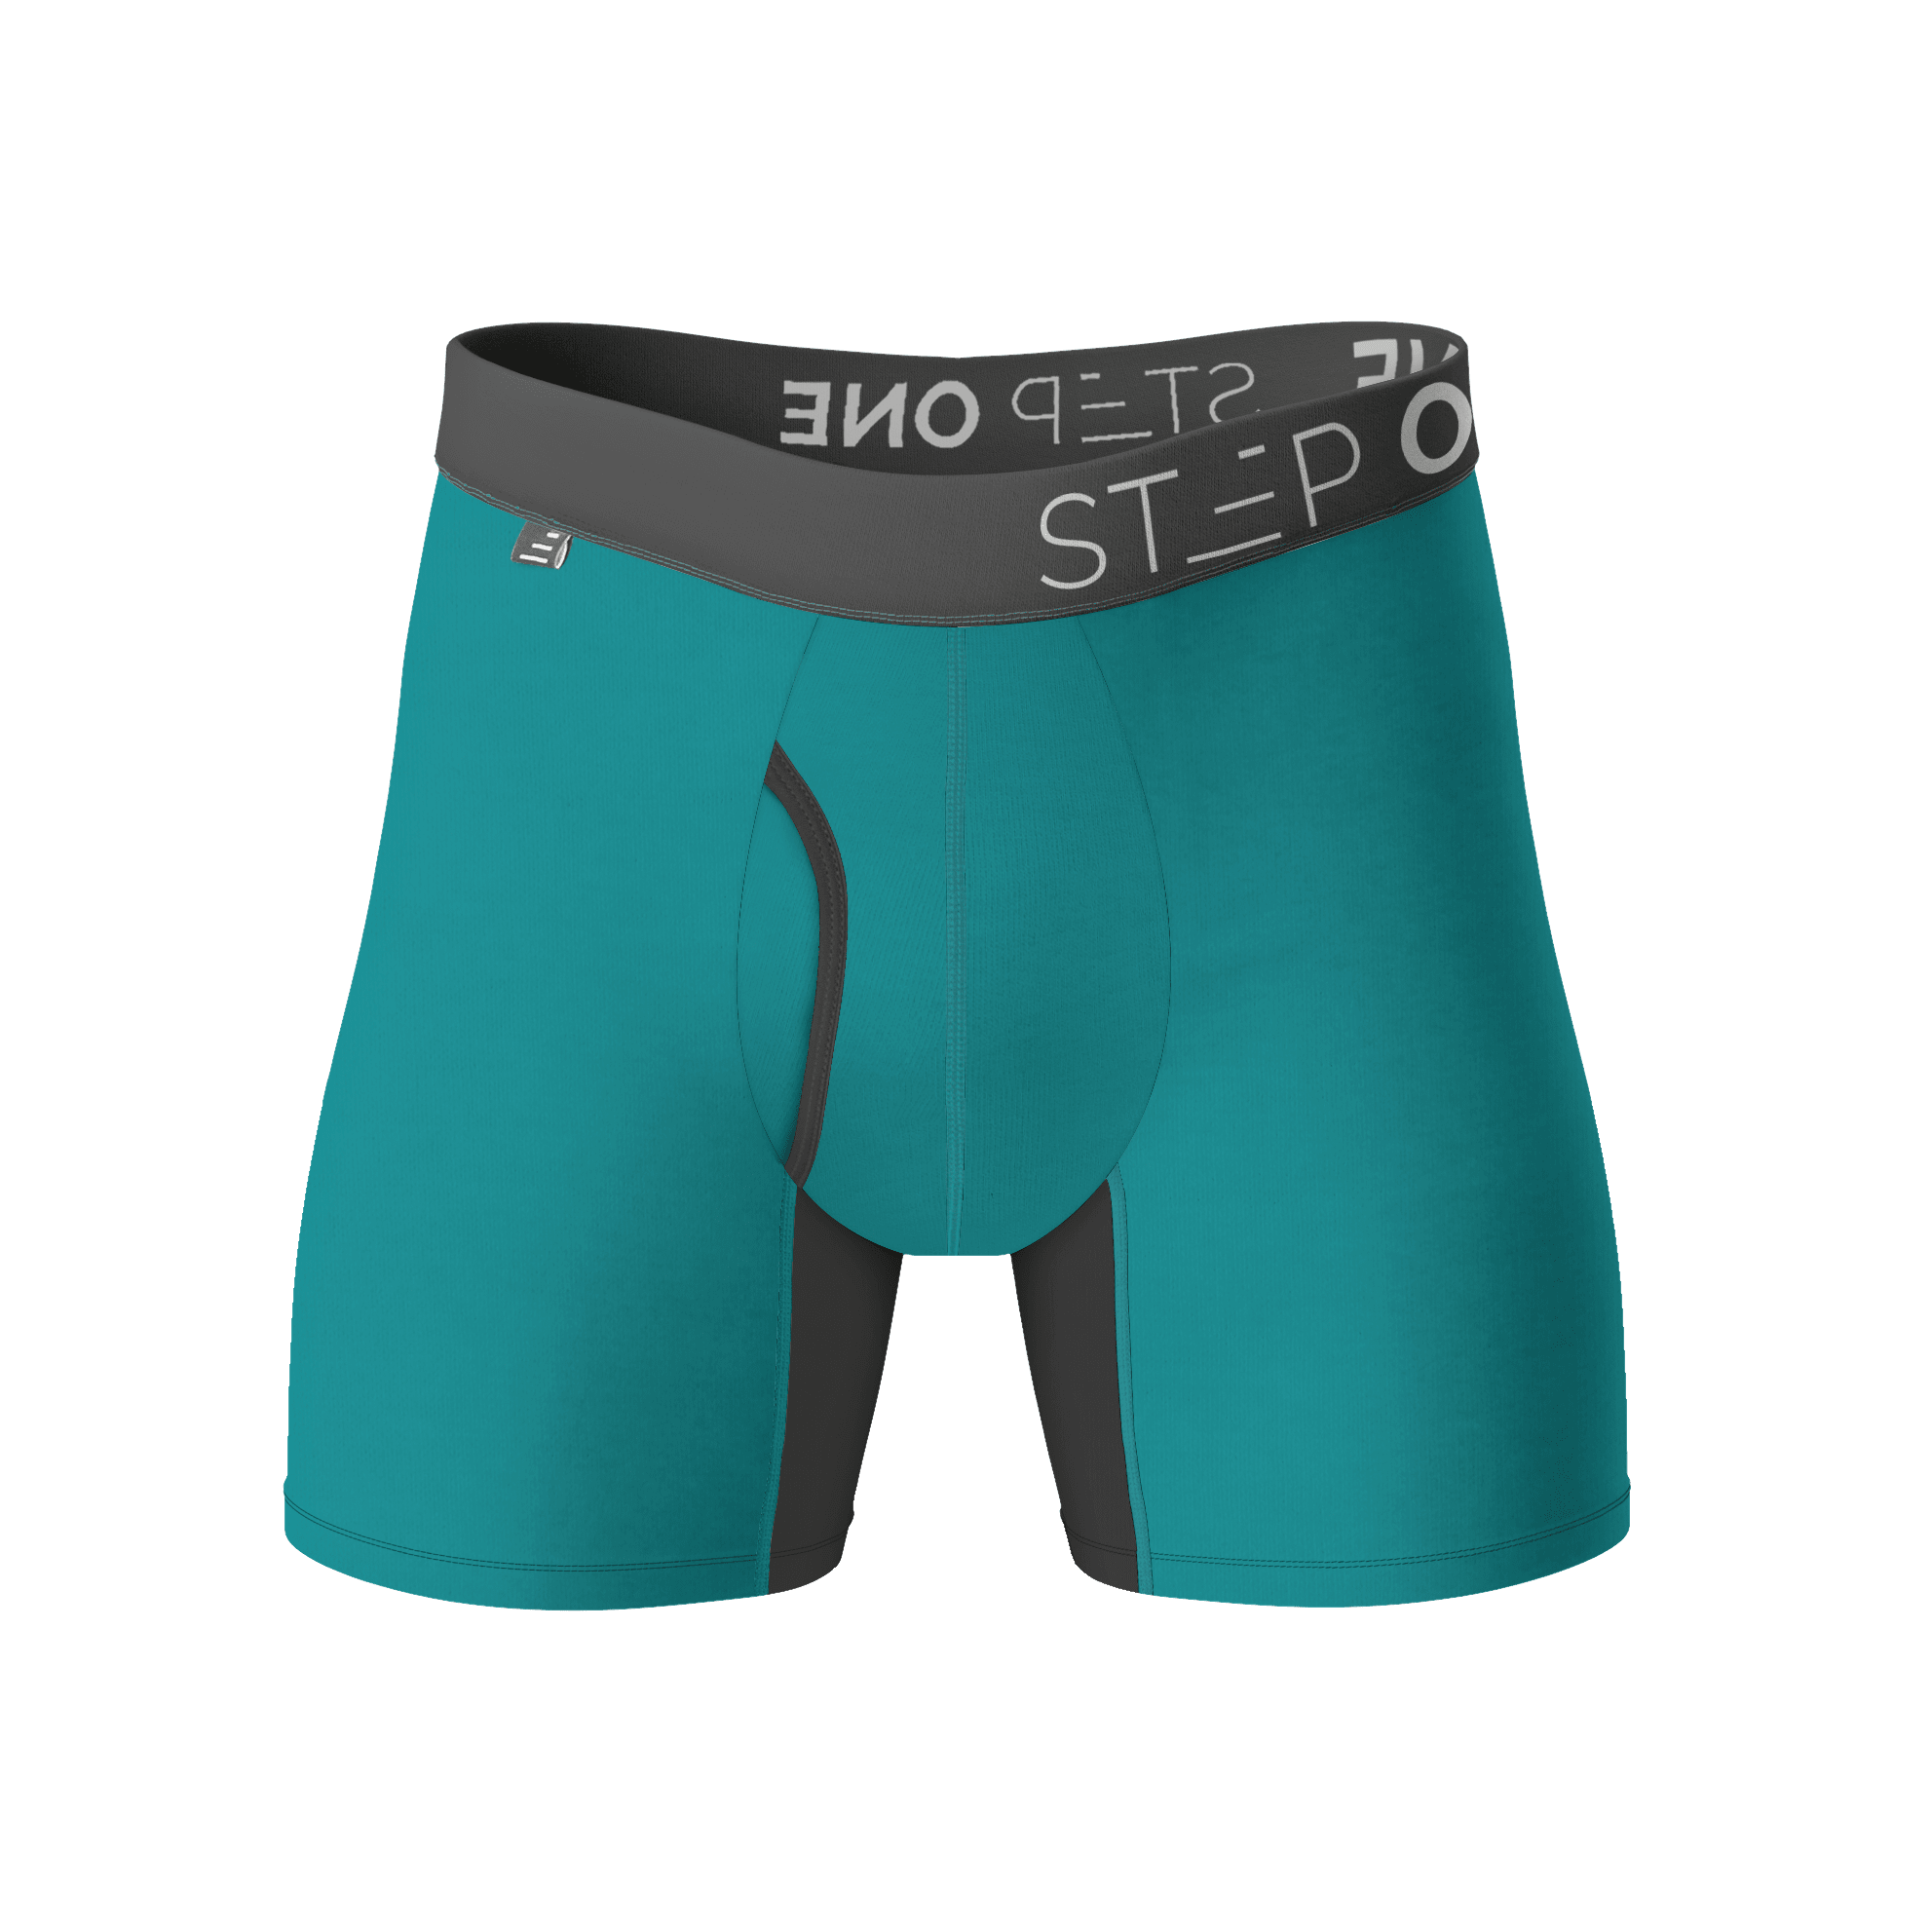 Men and Women's bamboo underwear, boxers, trunks and briefs